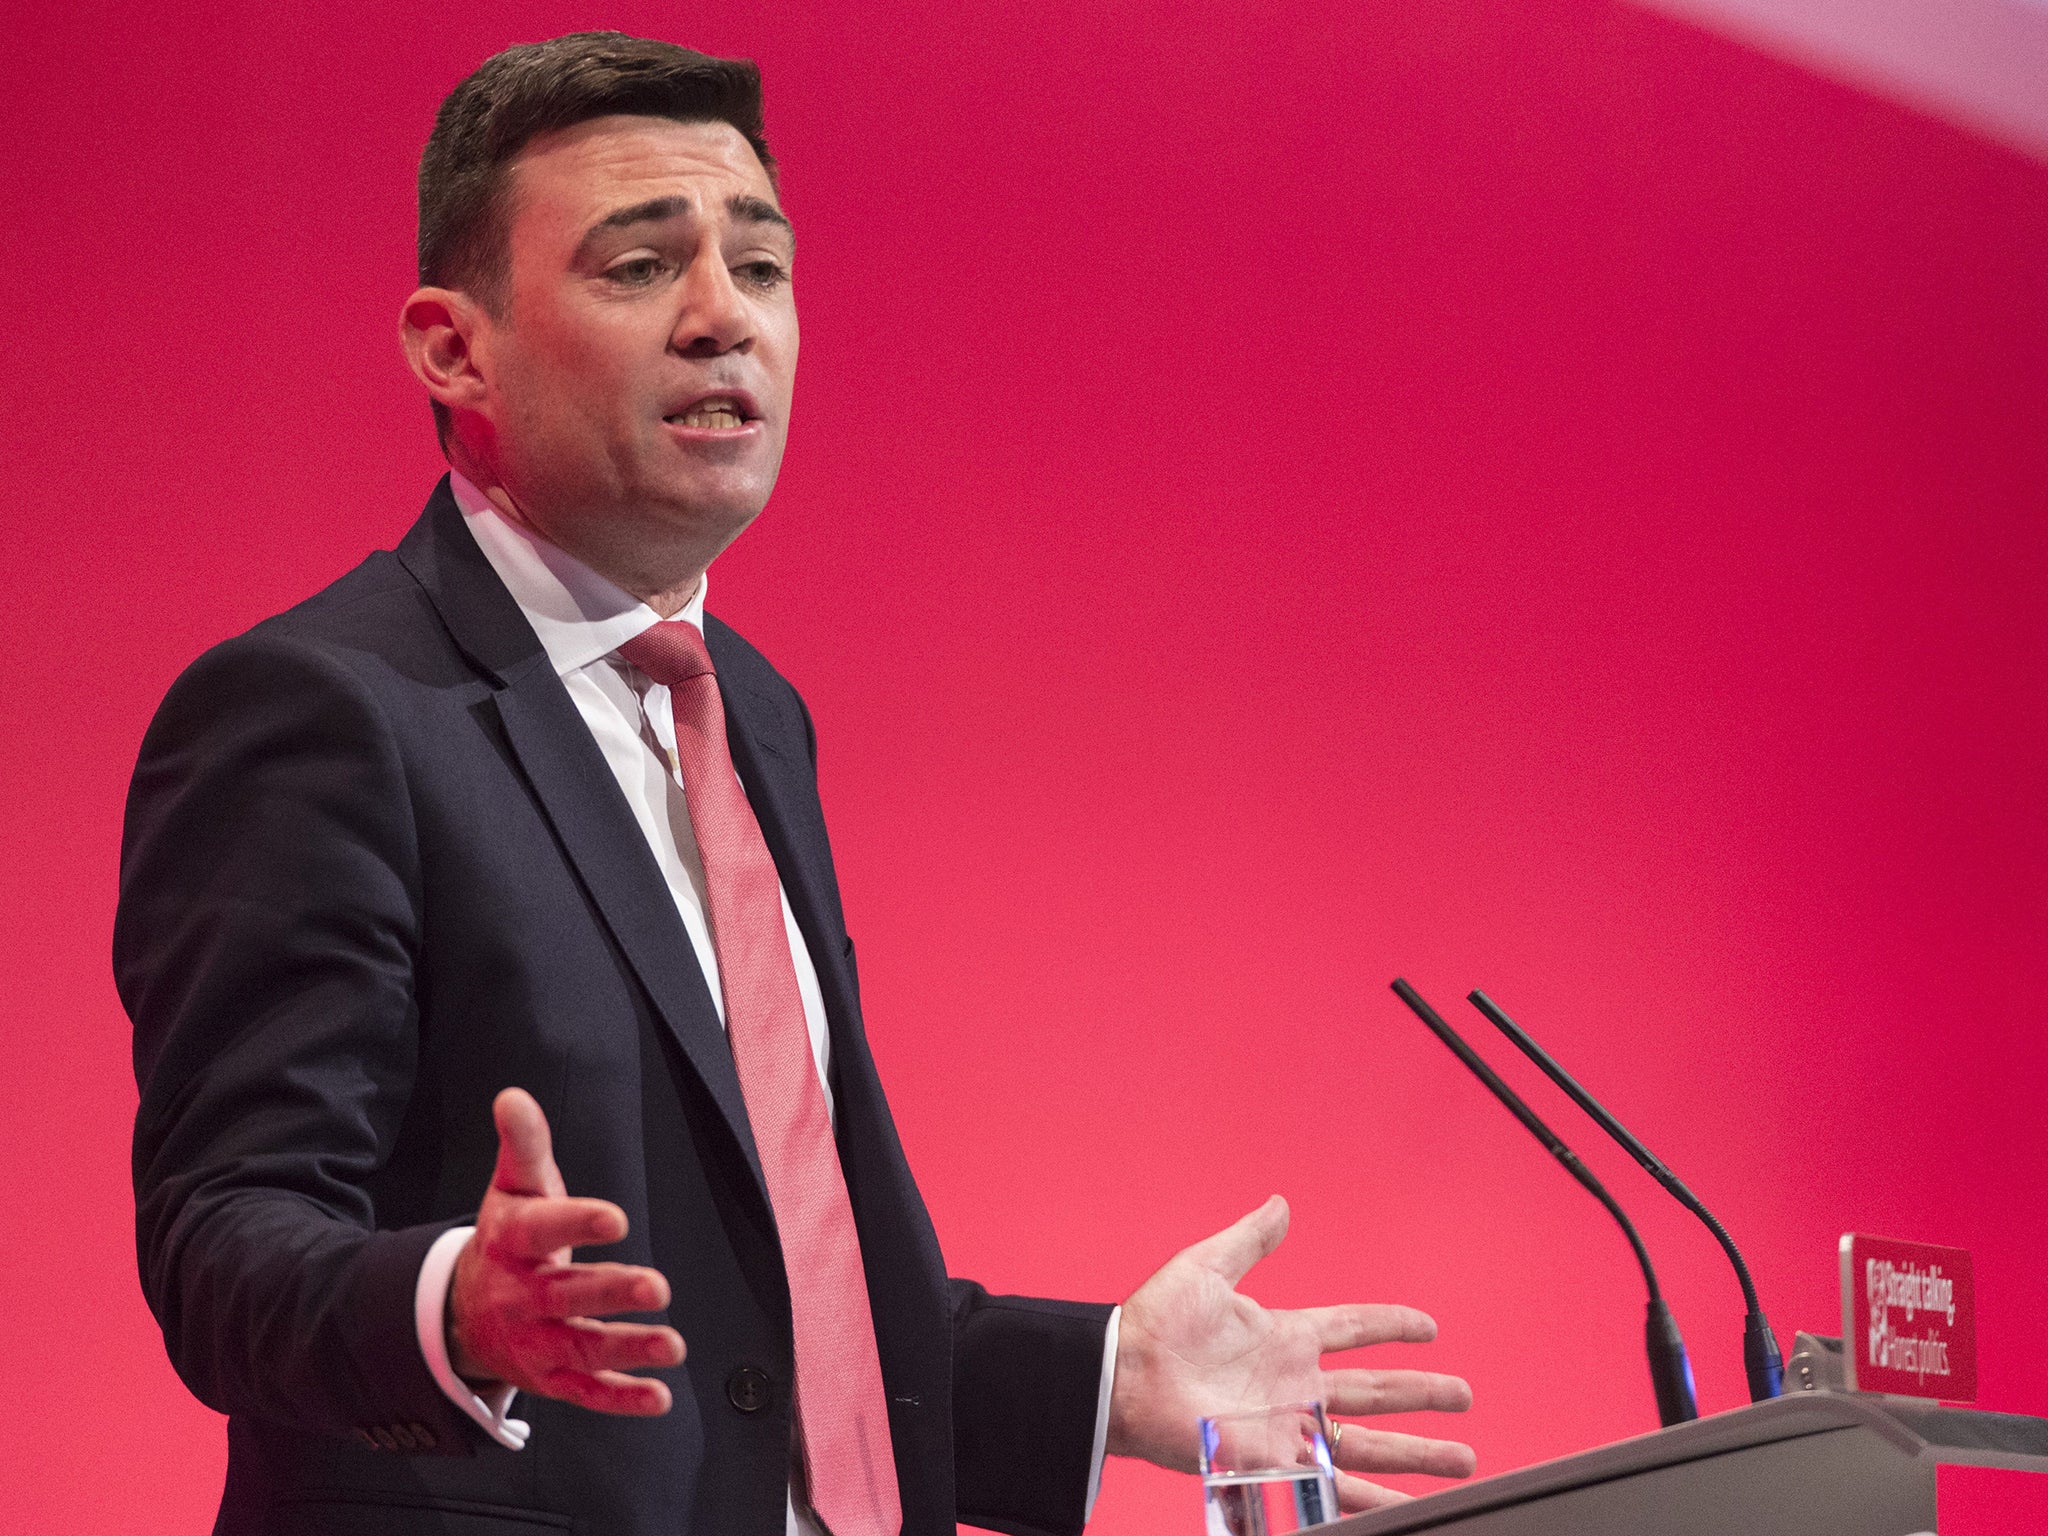 Andy Burnham has come under fire for saying that local politicans are not qualified to run for Metro Mayor positions